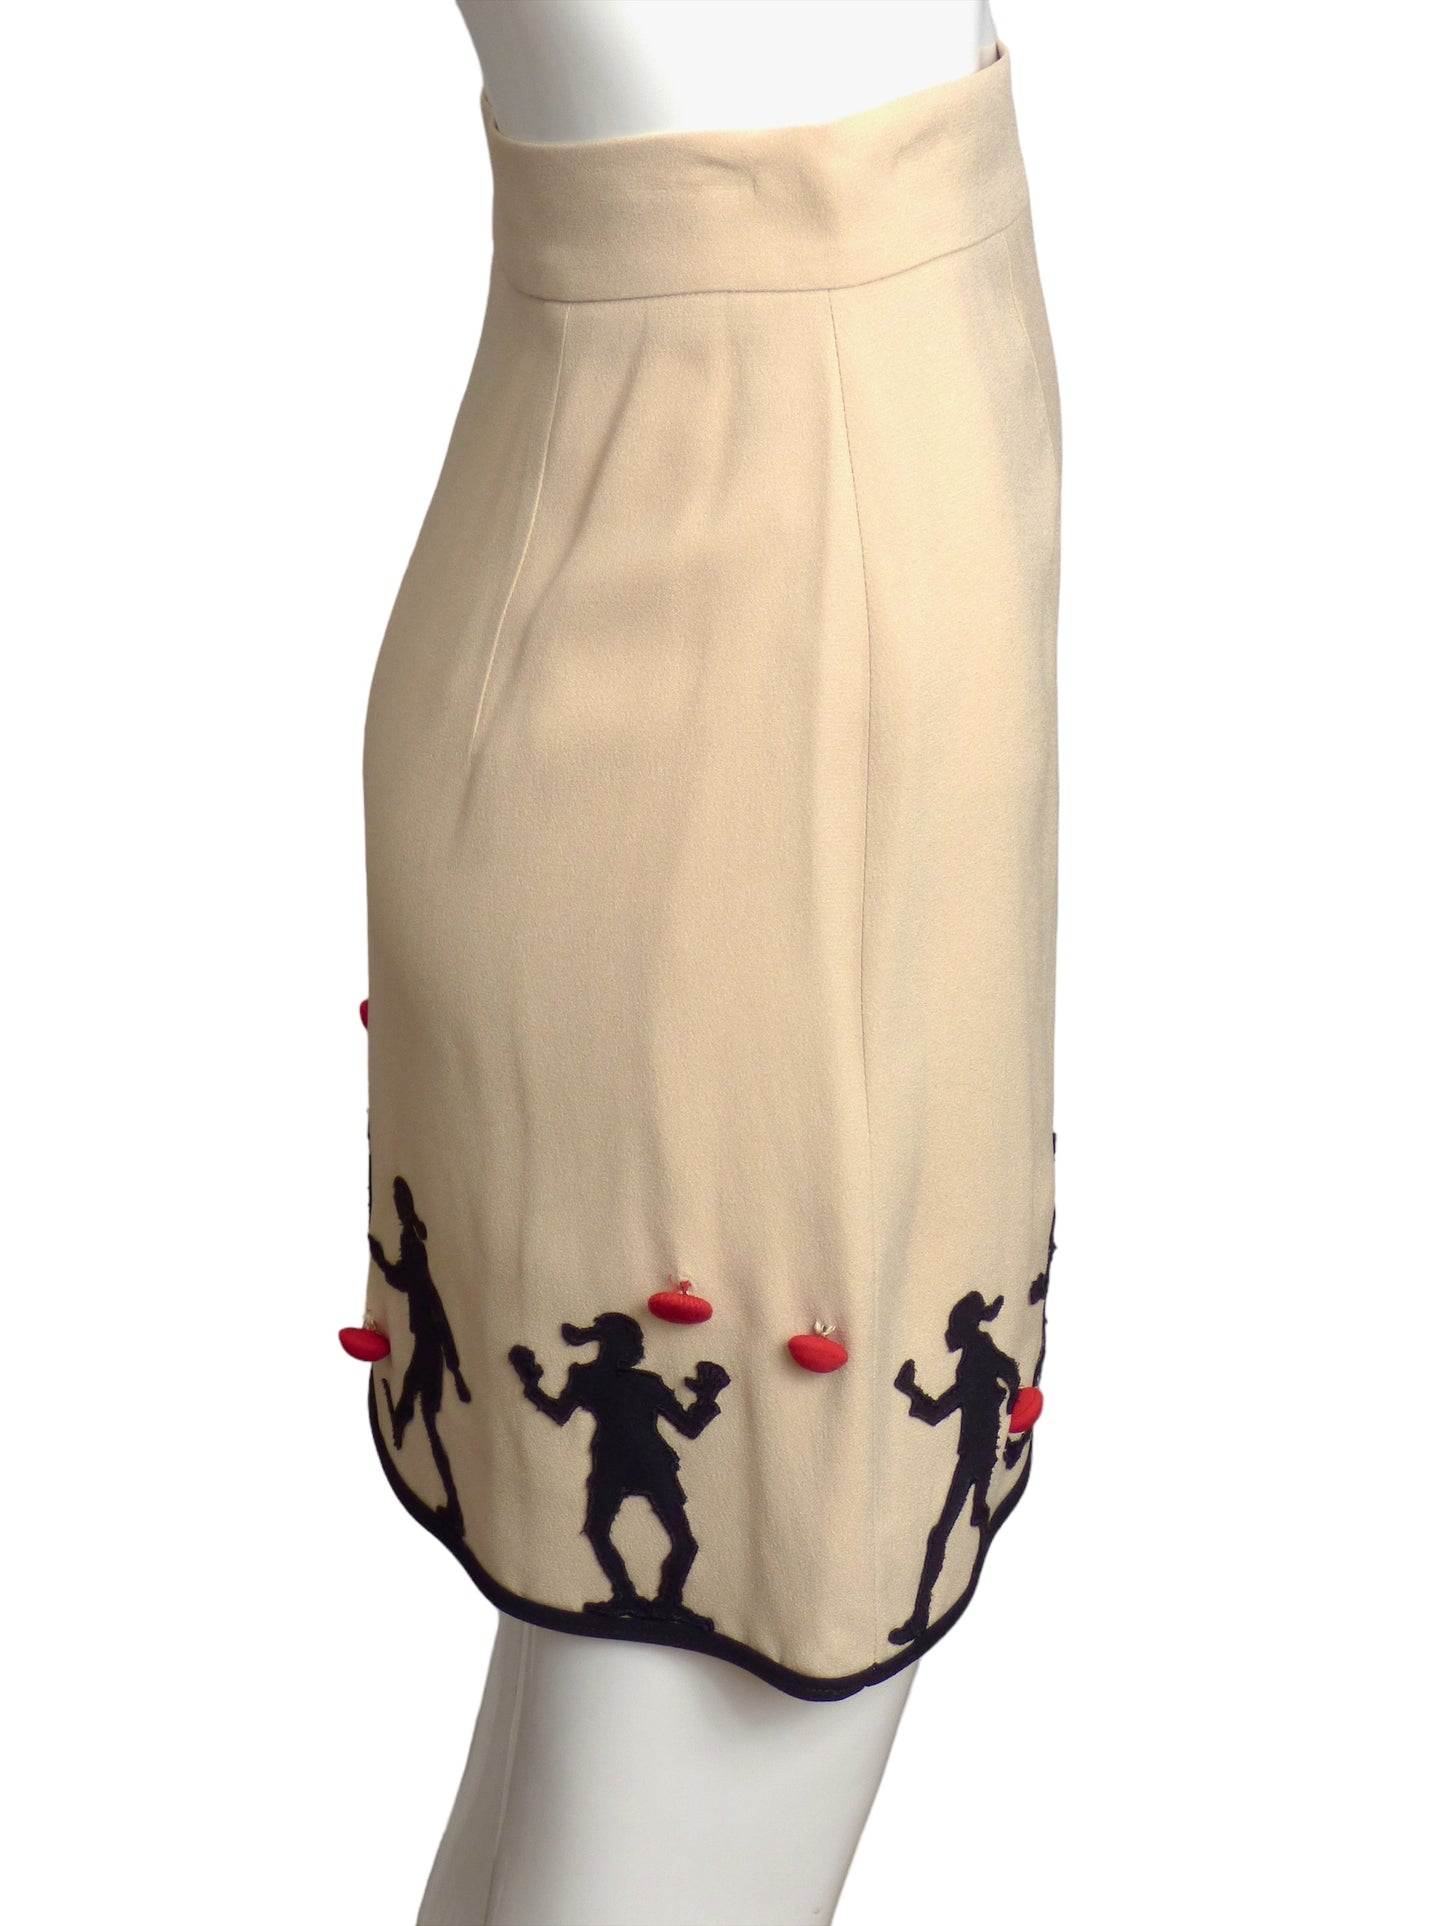 MOSCHINO CHEAP & CHIC- 1990s Olive Oyl Skirt, Size 8